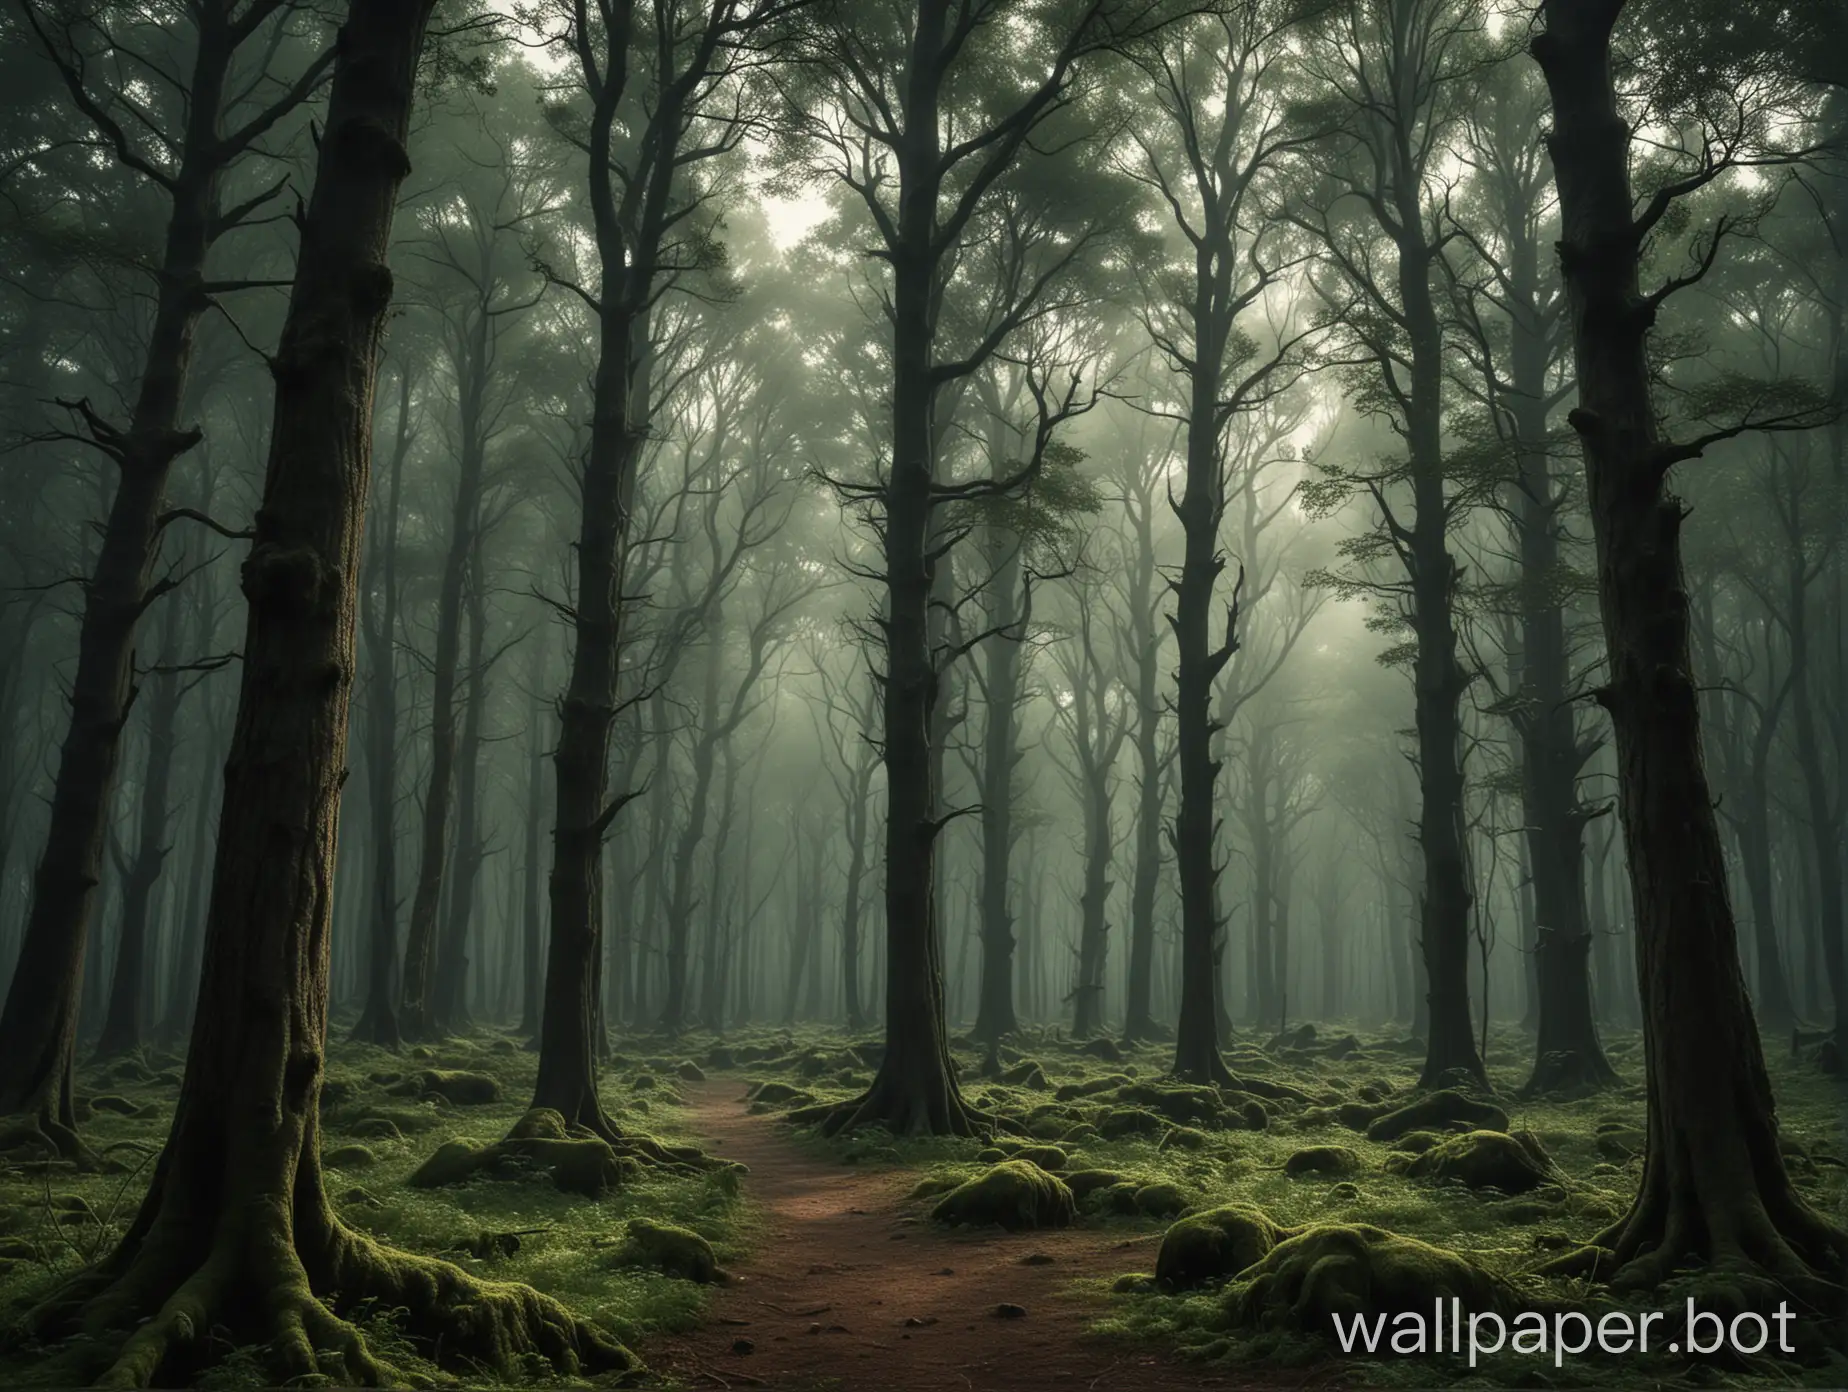 A dark green forest with large trees and a dramatic atmosphere in the afternoon